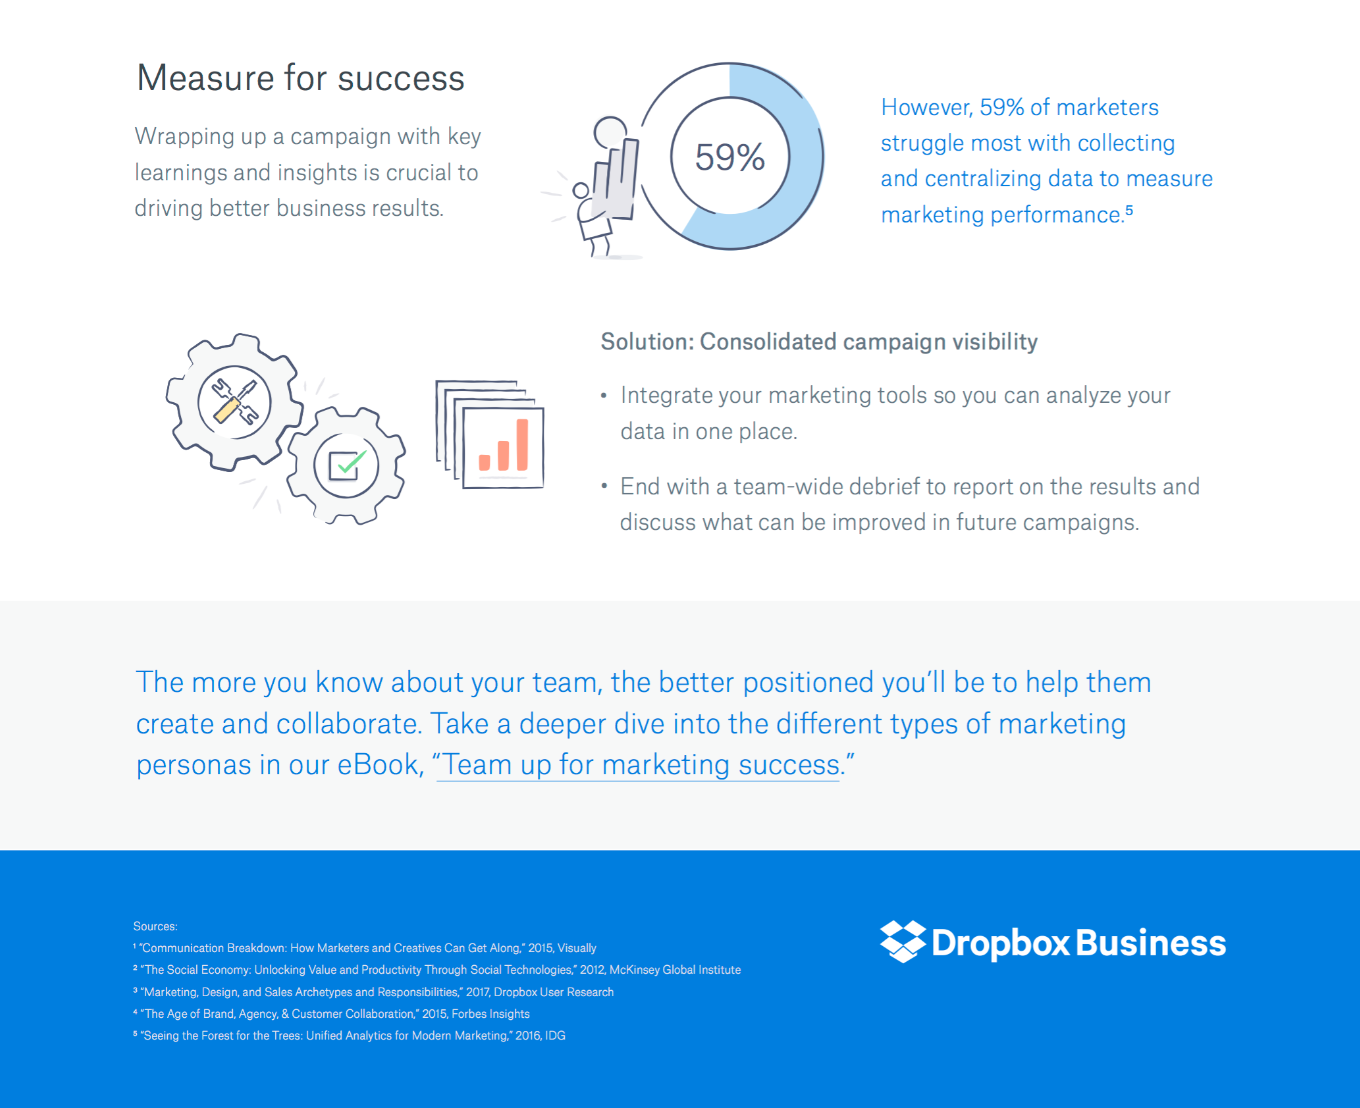 infographic from dropbox business